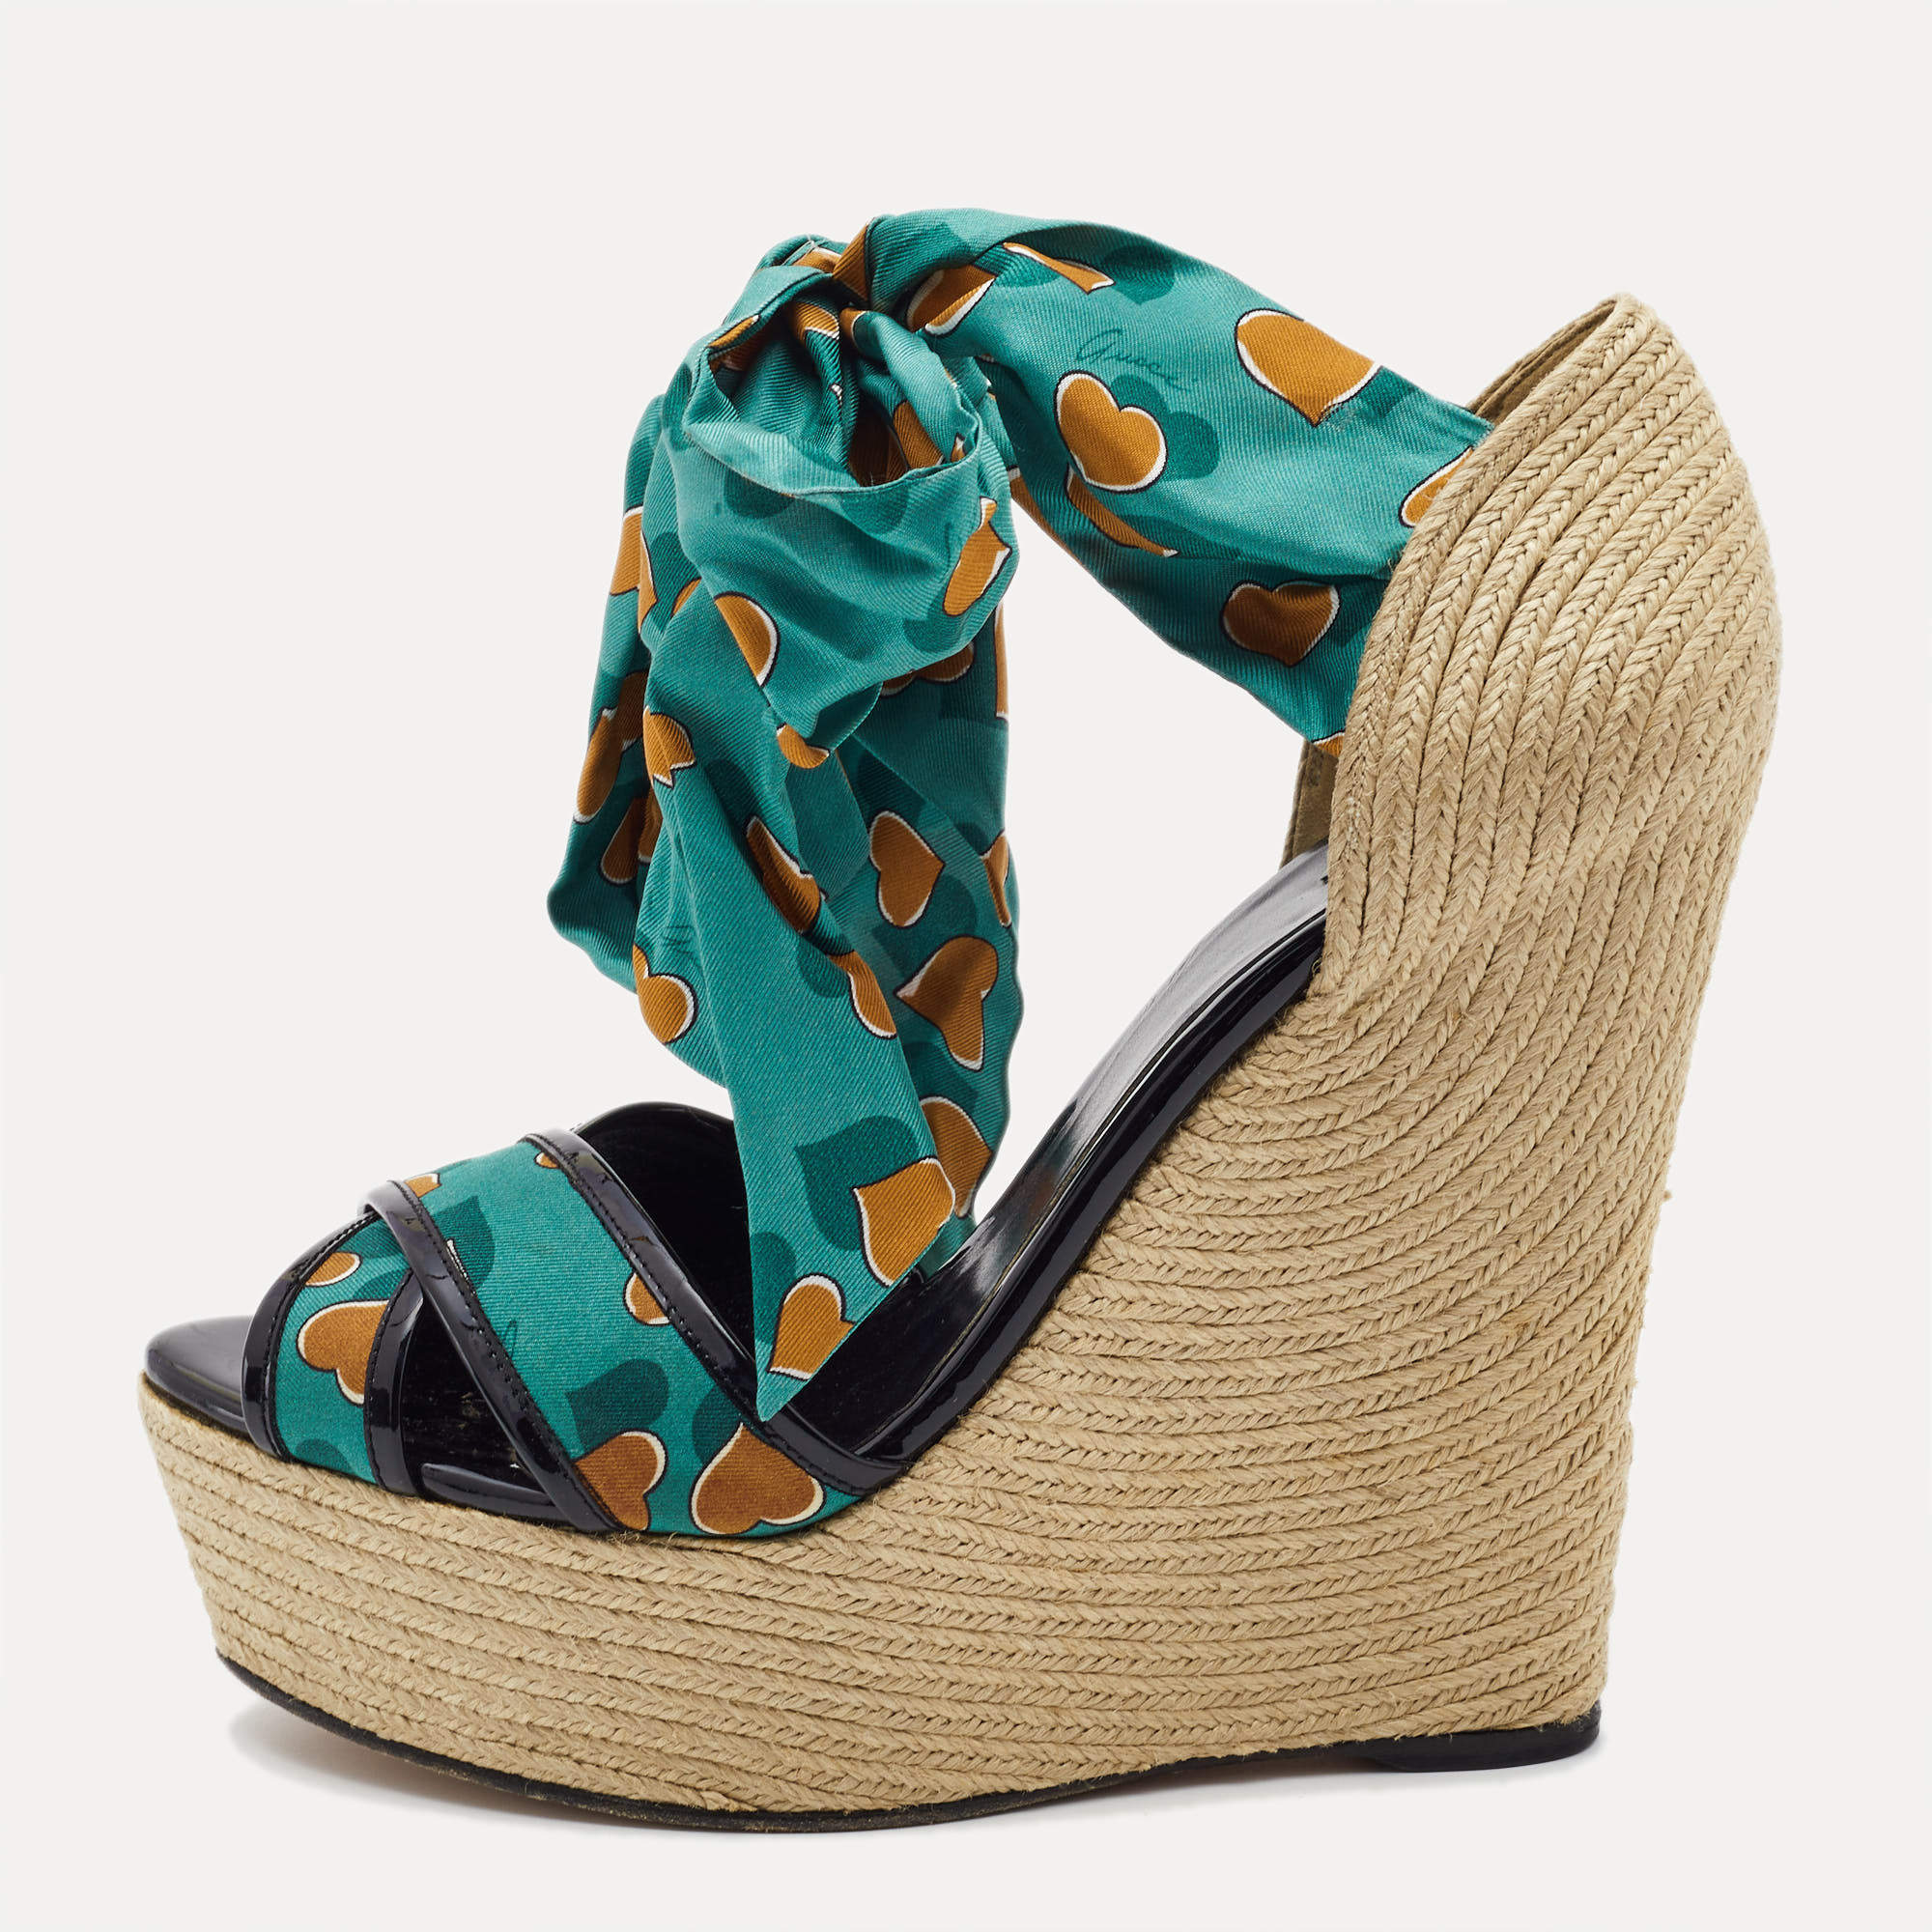 Gucci Multicolor Printed Fabric and Patent Espadrille Wedge Ankle Wrap Sandals Size 41